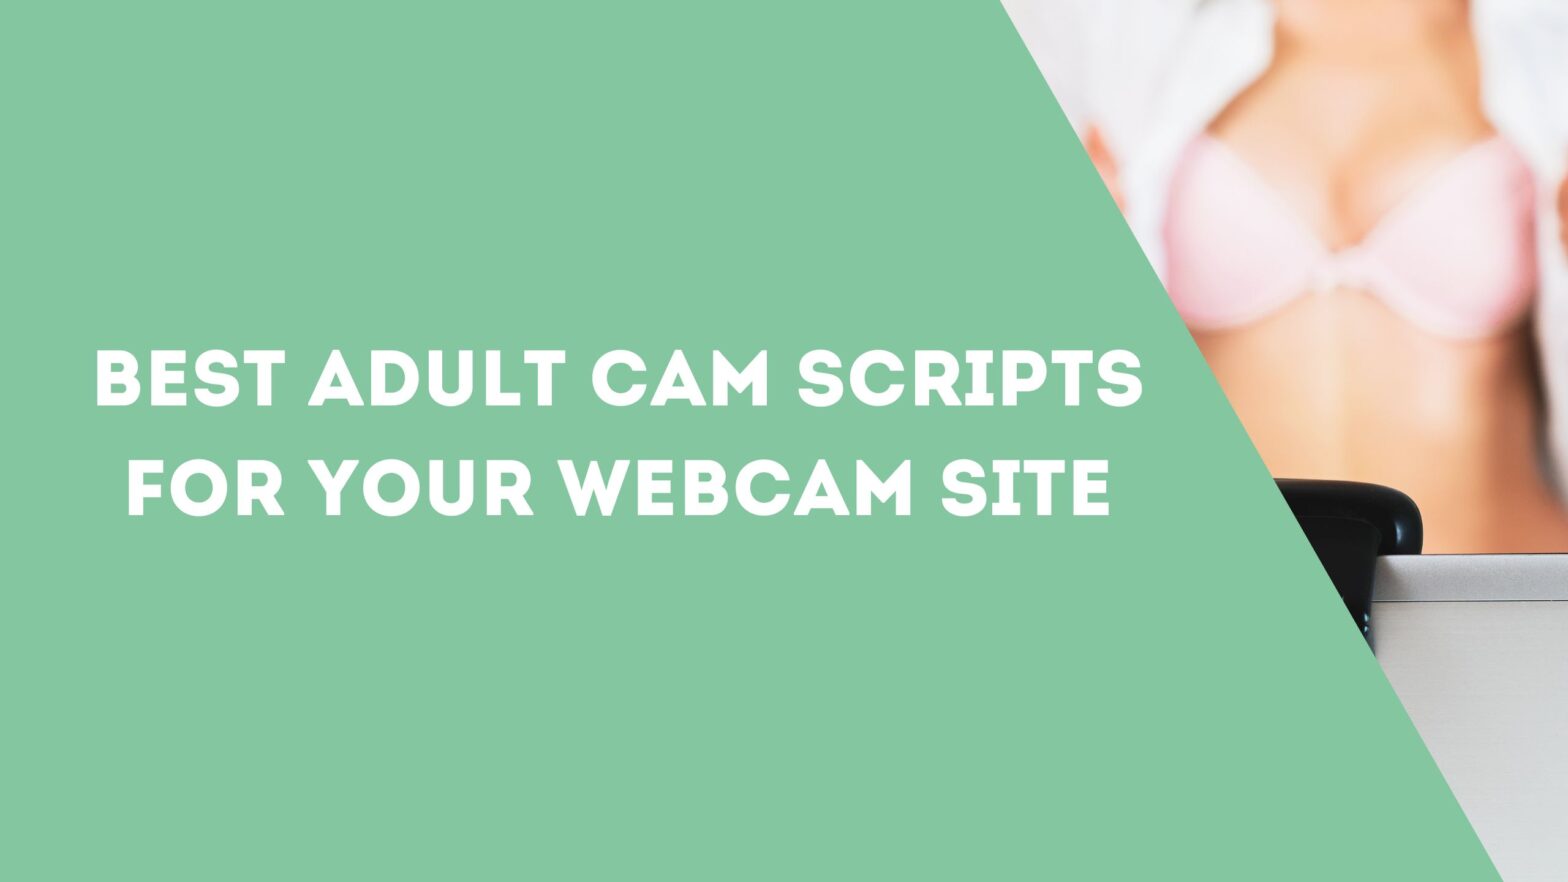 Best Adult Cam Scripts for Your Webcam Site